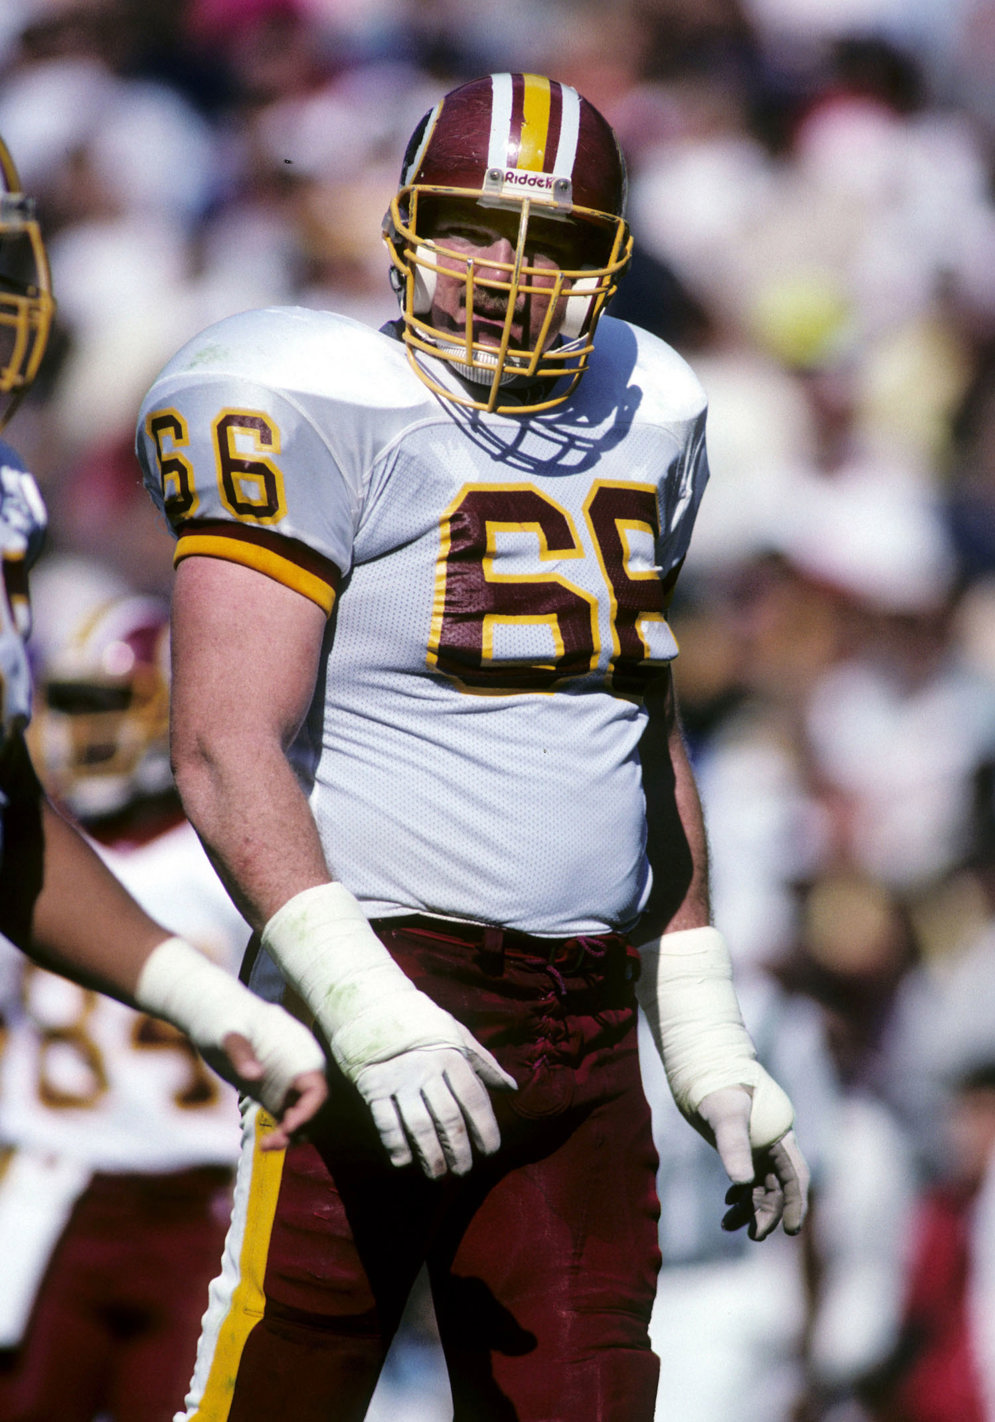 Washington Football Team offensive tackle Joe Jacoby was a giant among men, but he actually had to bulk up to make it in the NFL. (AP Photo/Al Messerschmidt)